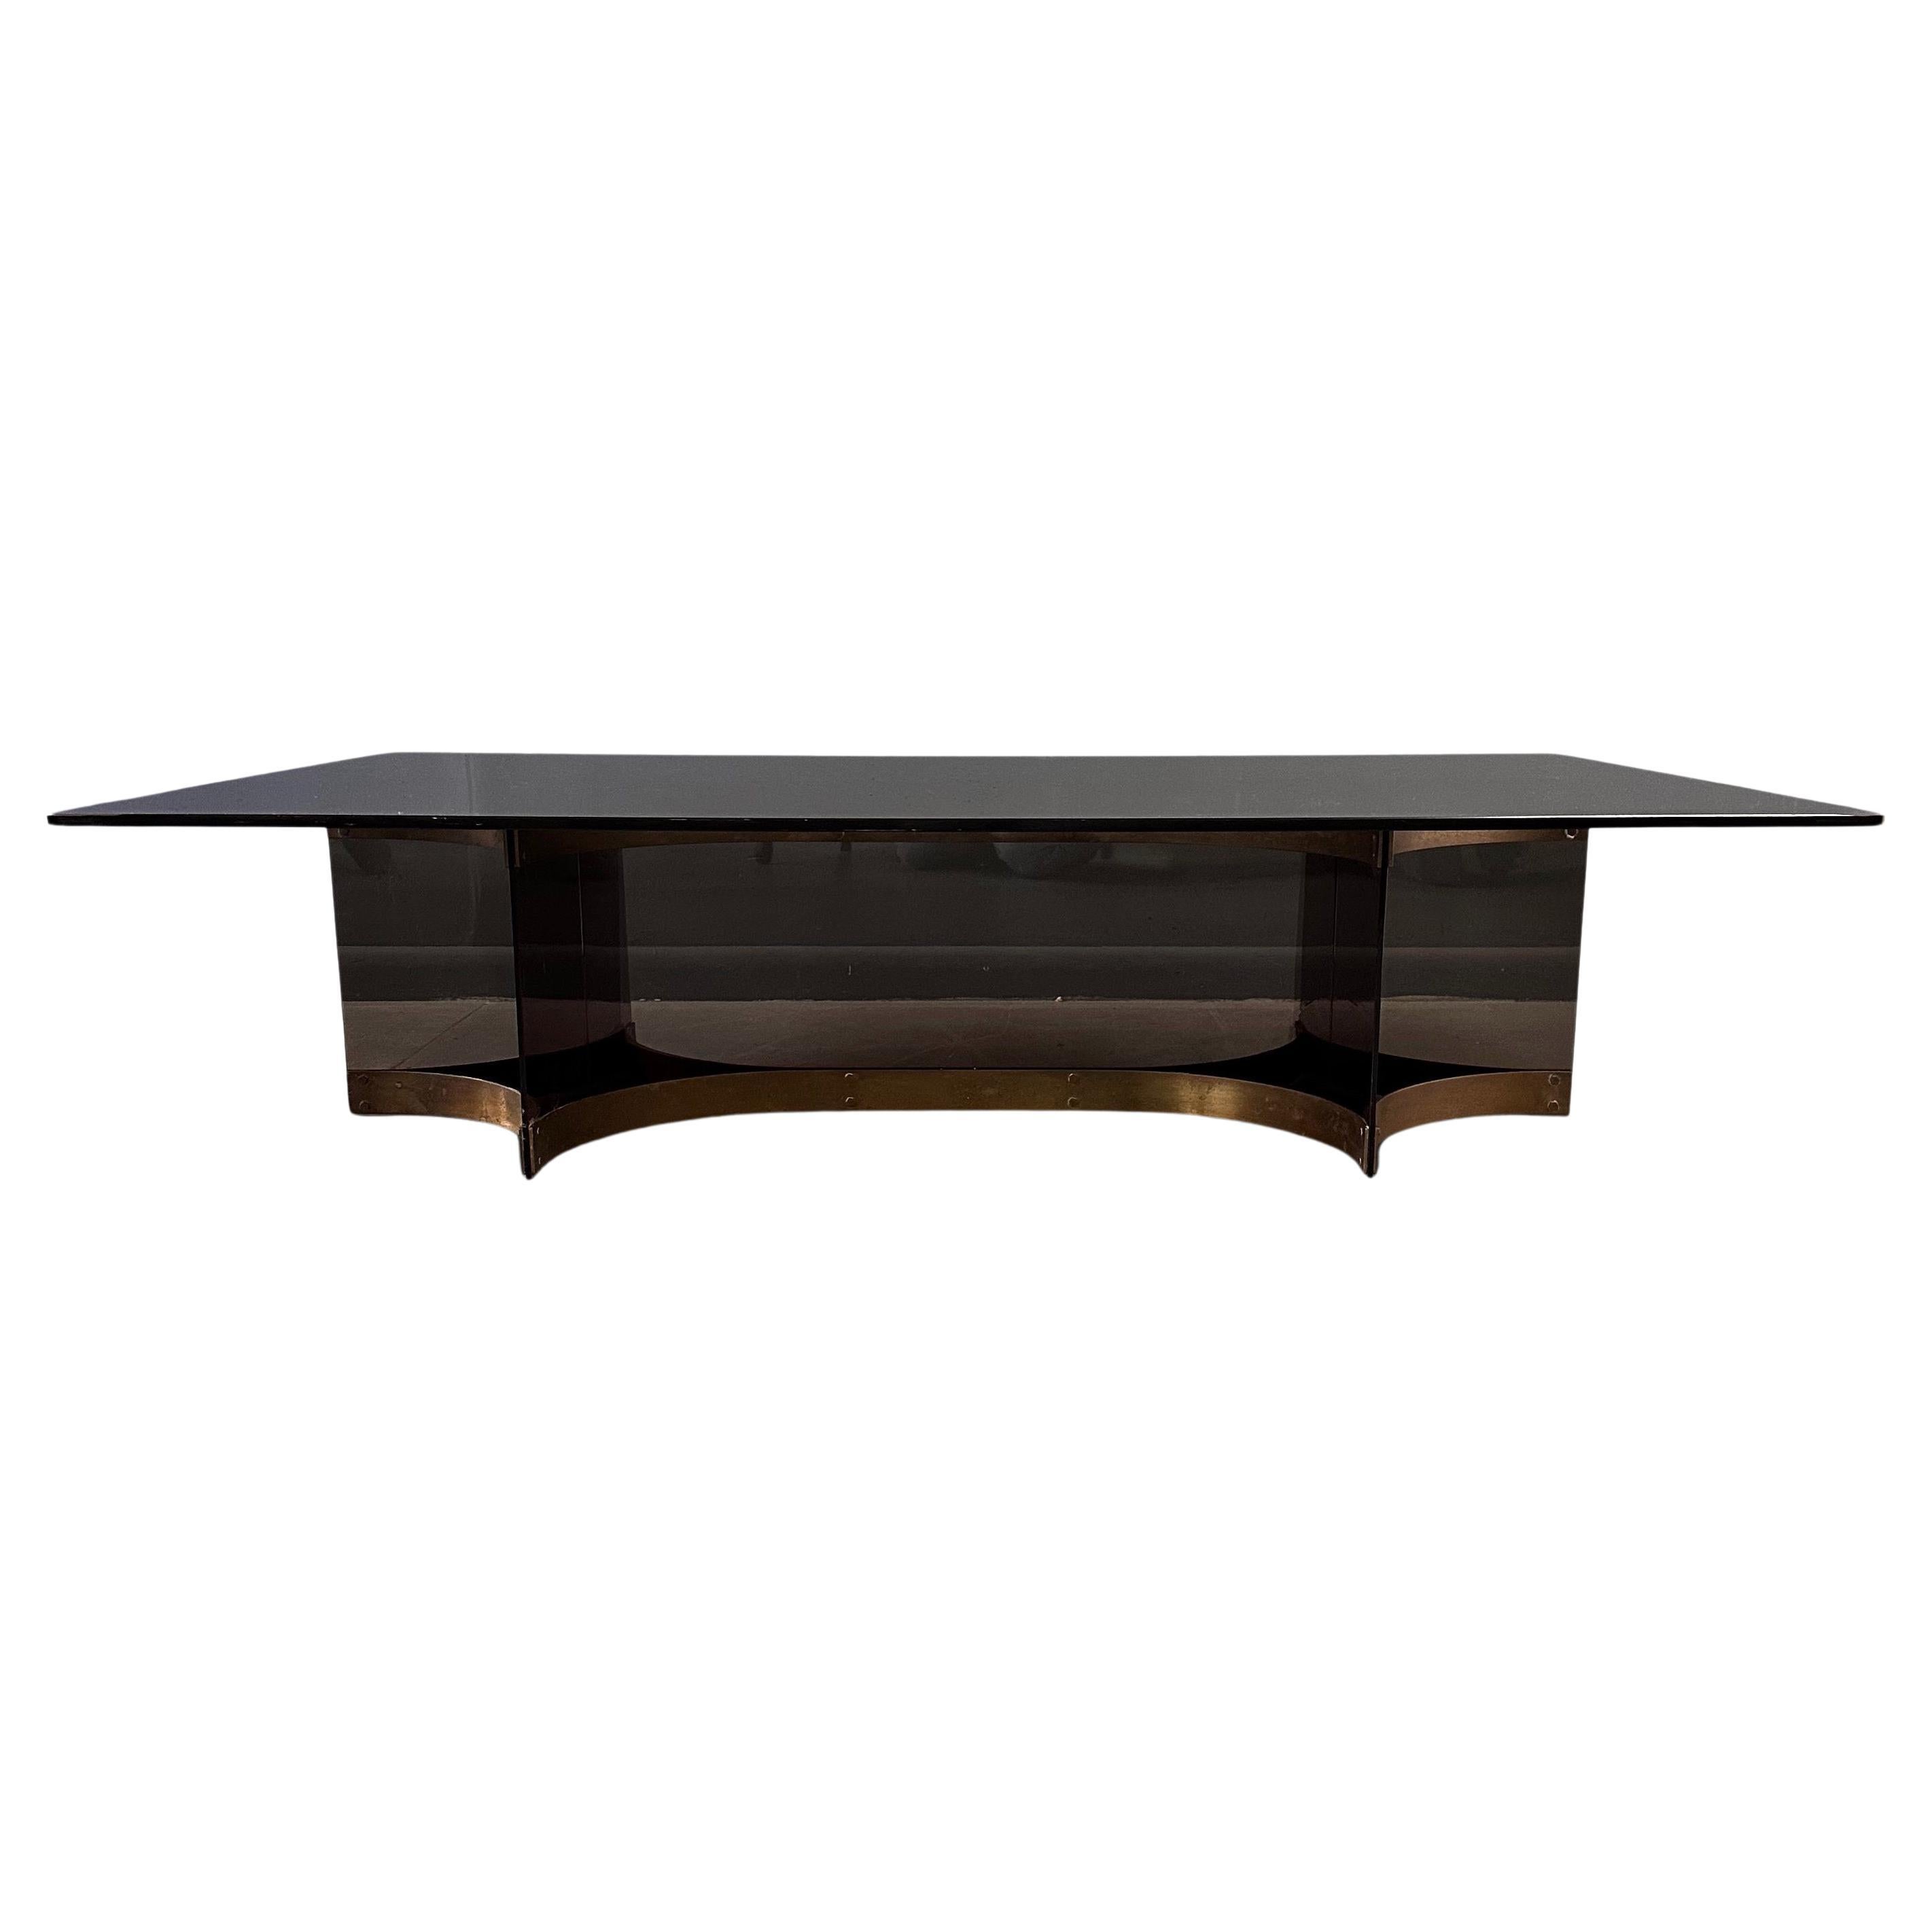 Wonderful graciously proportioned coffee table designed by renown designer Alessandro Albrizzi. This dramatic table with it's smoked glass top and beautifully patinated brass table base will make a dramatic choice for your next project.